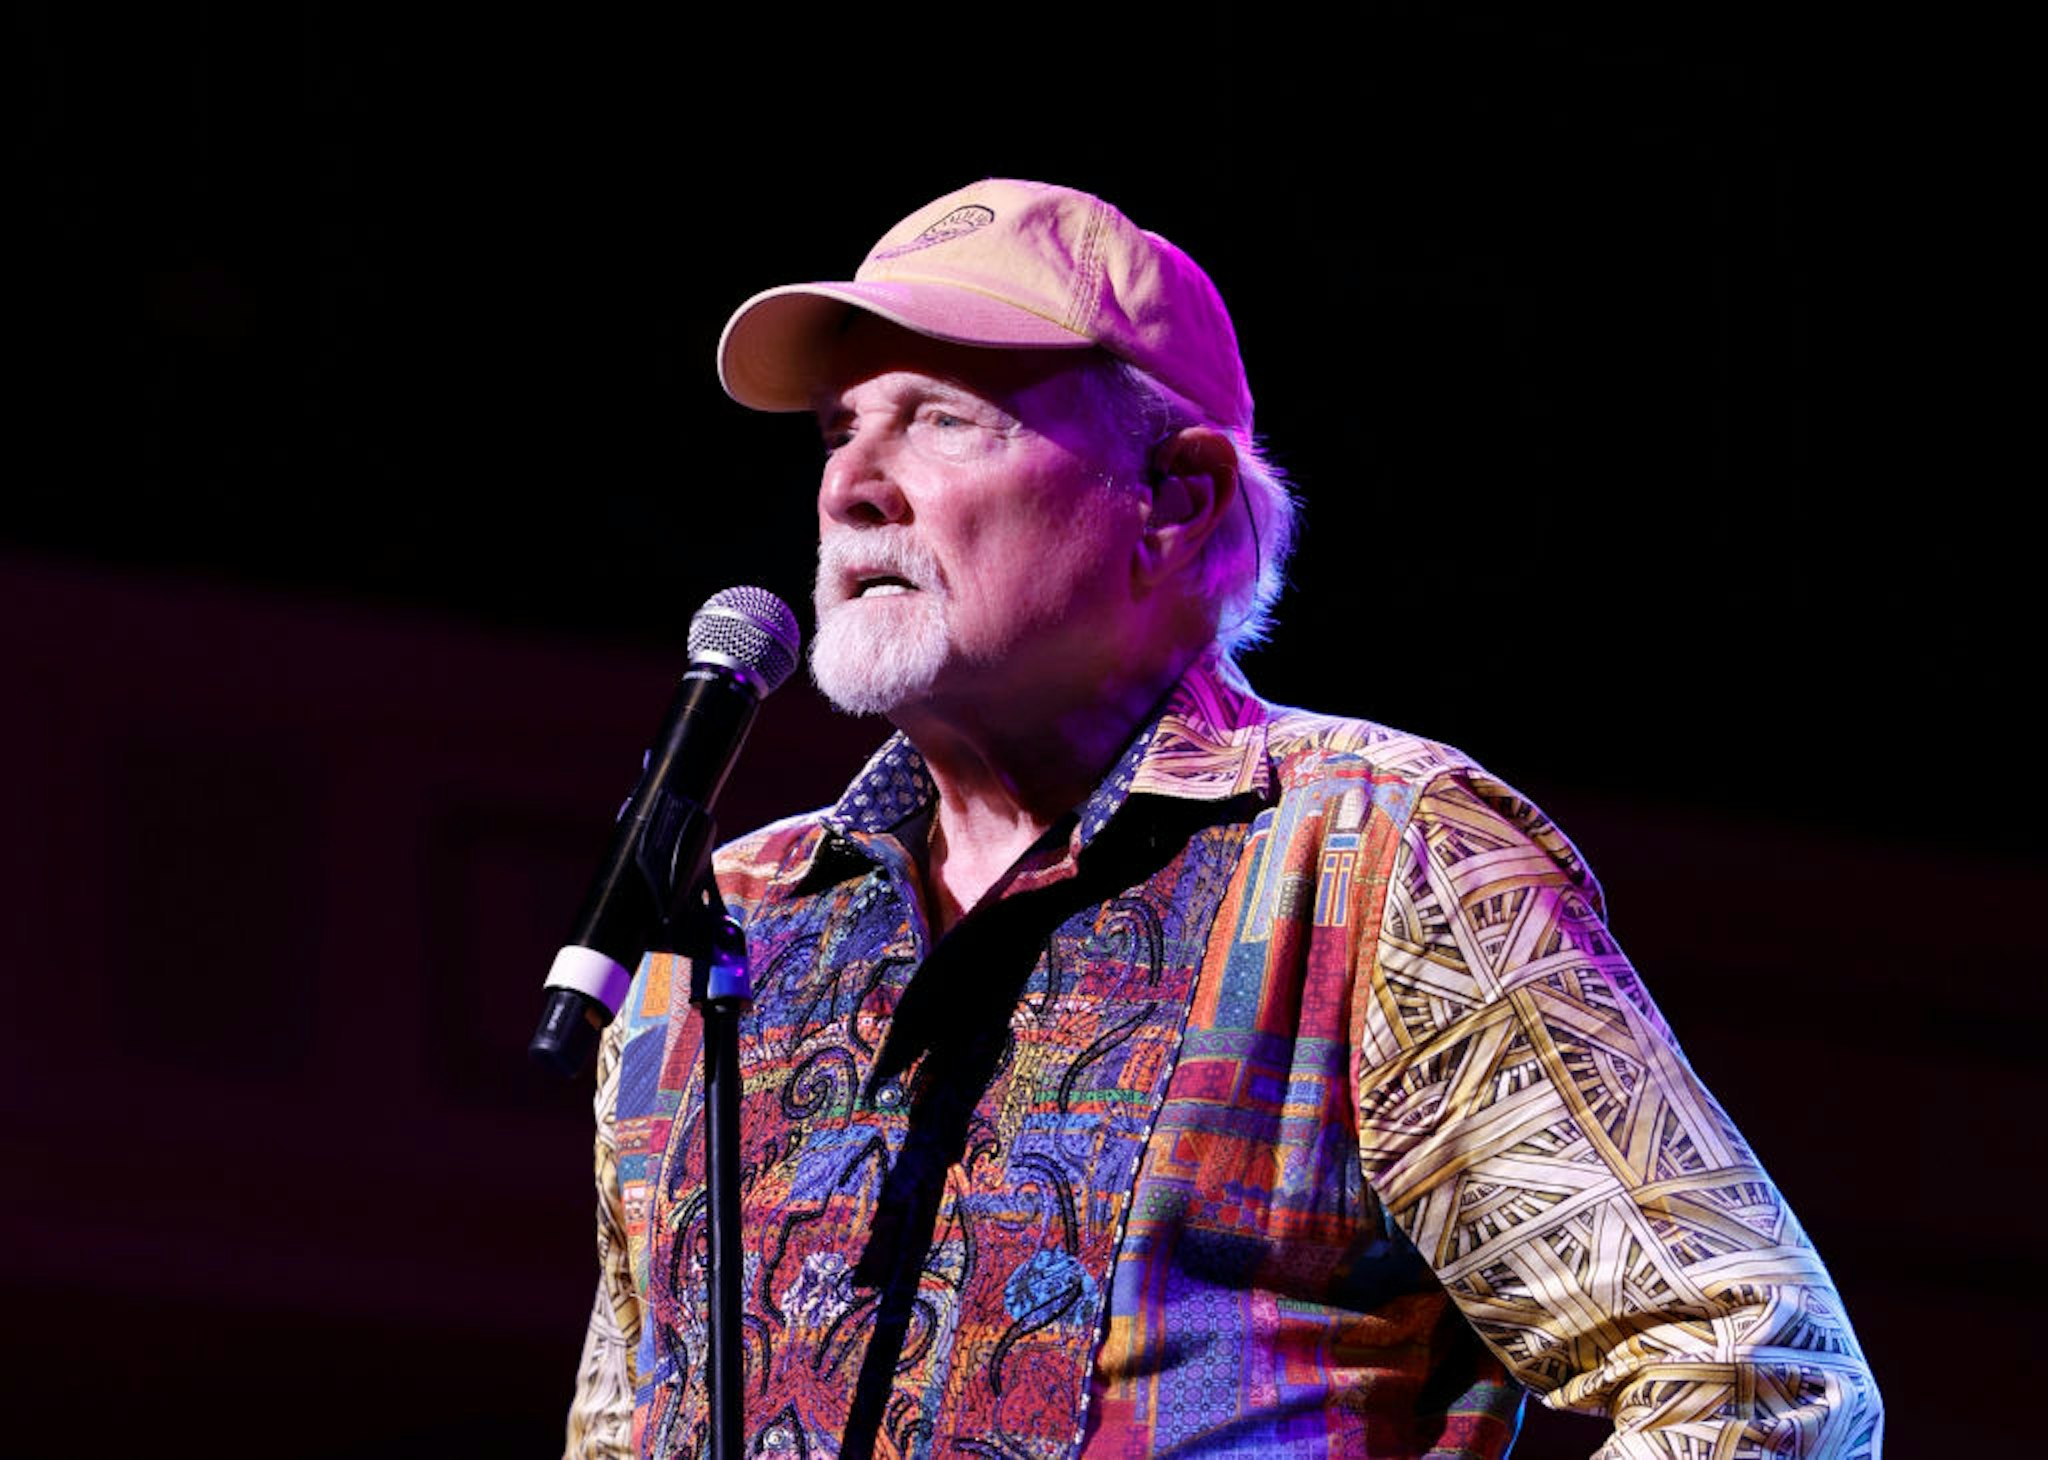 NASHVILLE, TENNESSEE - MAY 25: Mike Love of The Beach Boys performs at Schermerhorn Symphony Center on May 25, 2023 in Nashville, Tennessee. (Photo by Jason Kempin/Getty Images)